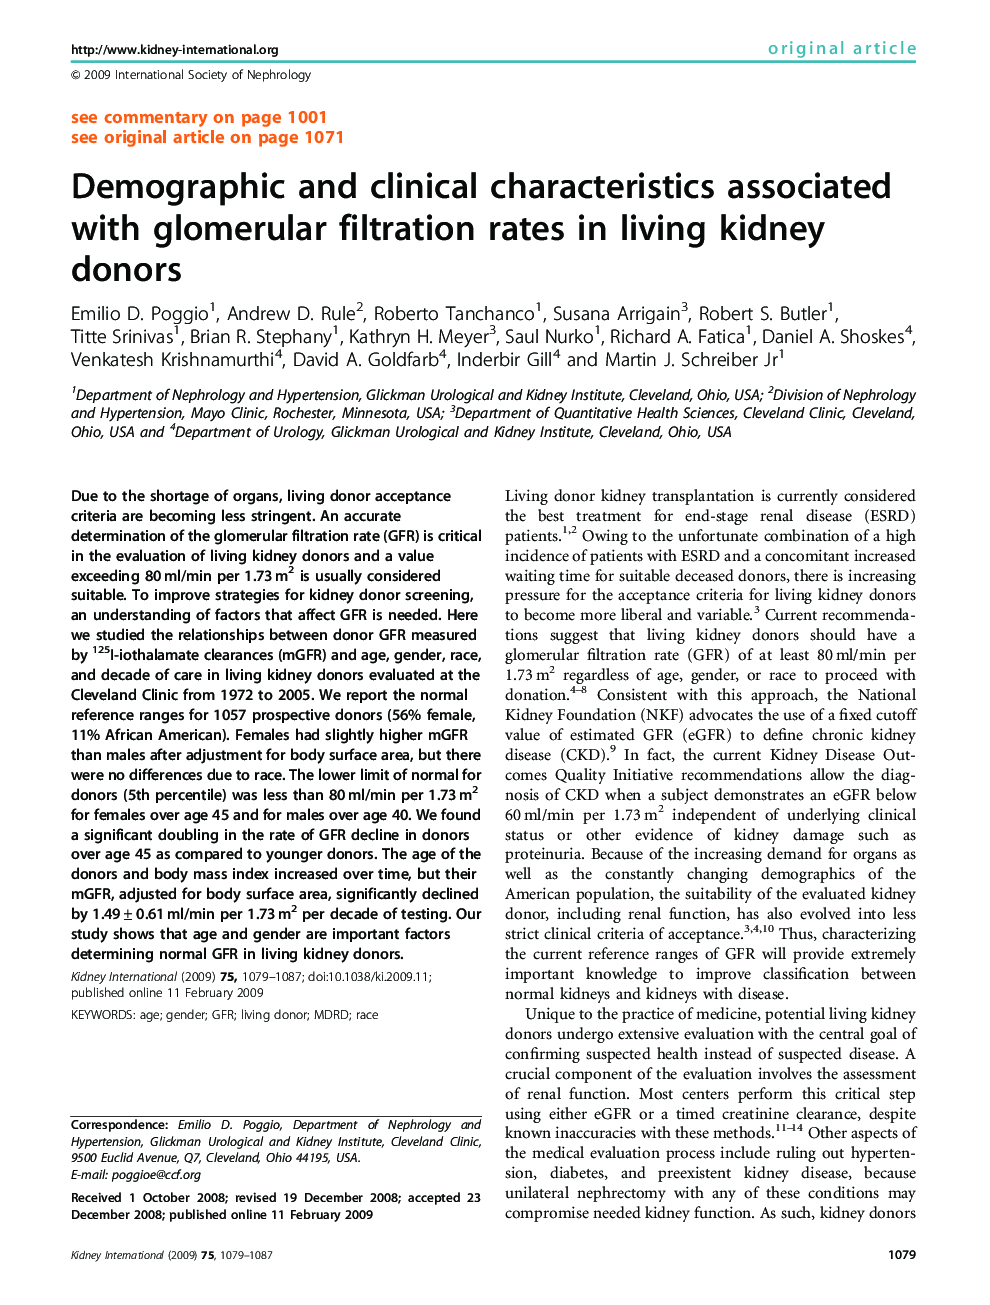 Demographic and clinical characteristics associated with glomerular filtration rates in living kidney donors